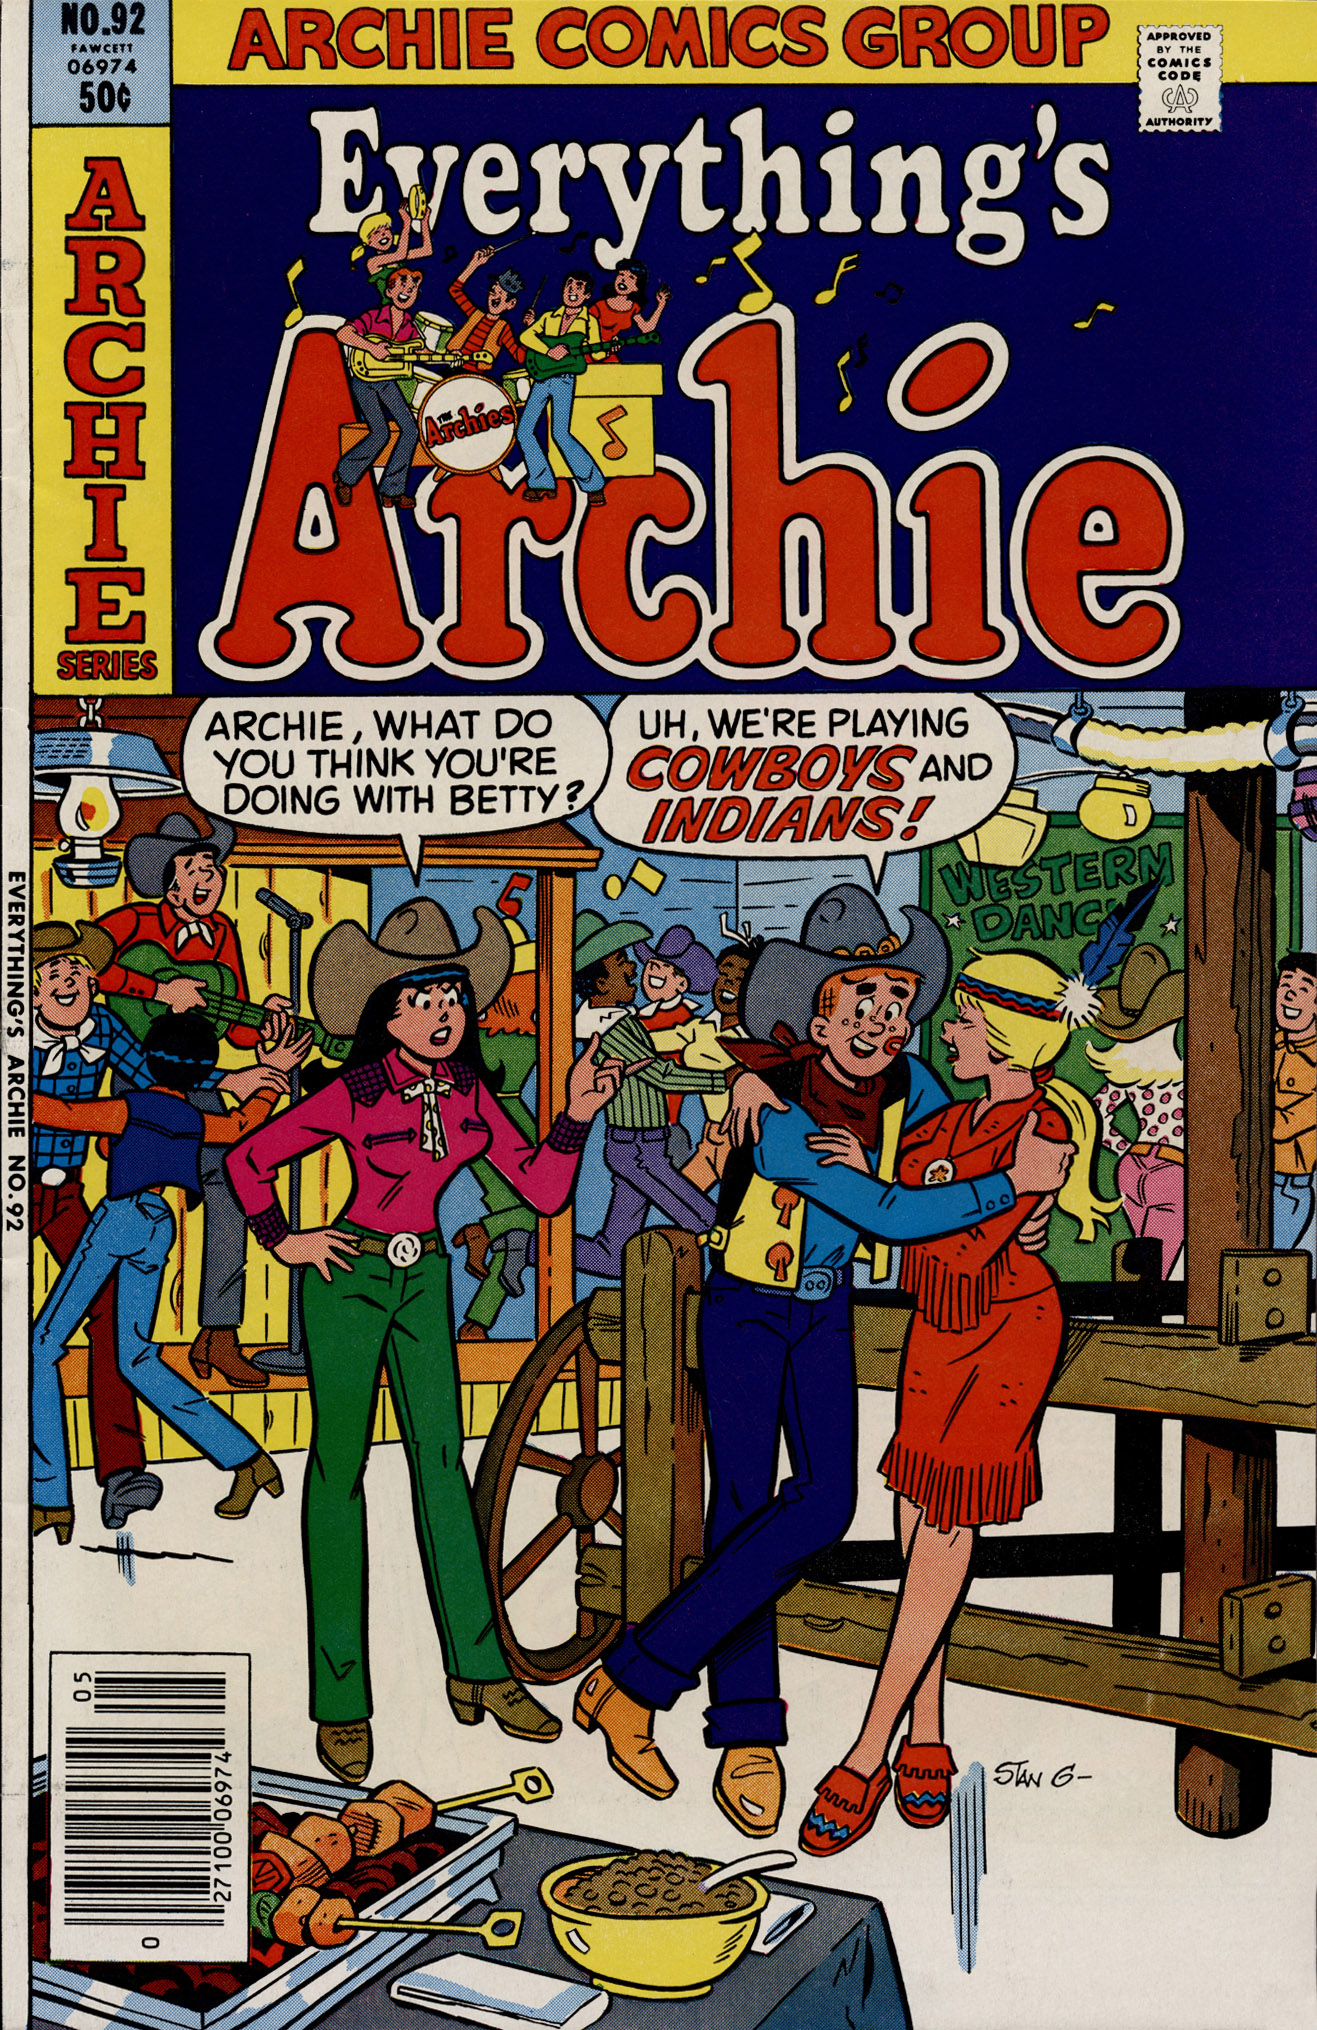 Read online Everything's Archie comic -  Issue #92 - 1